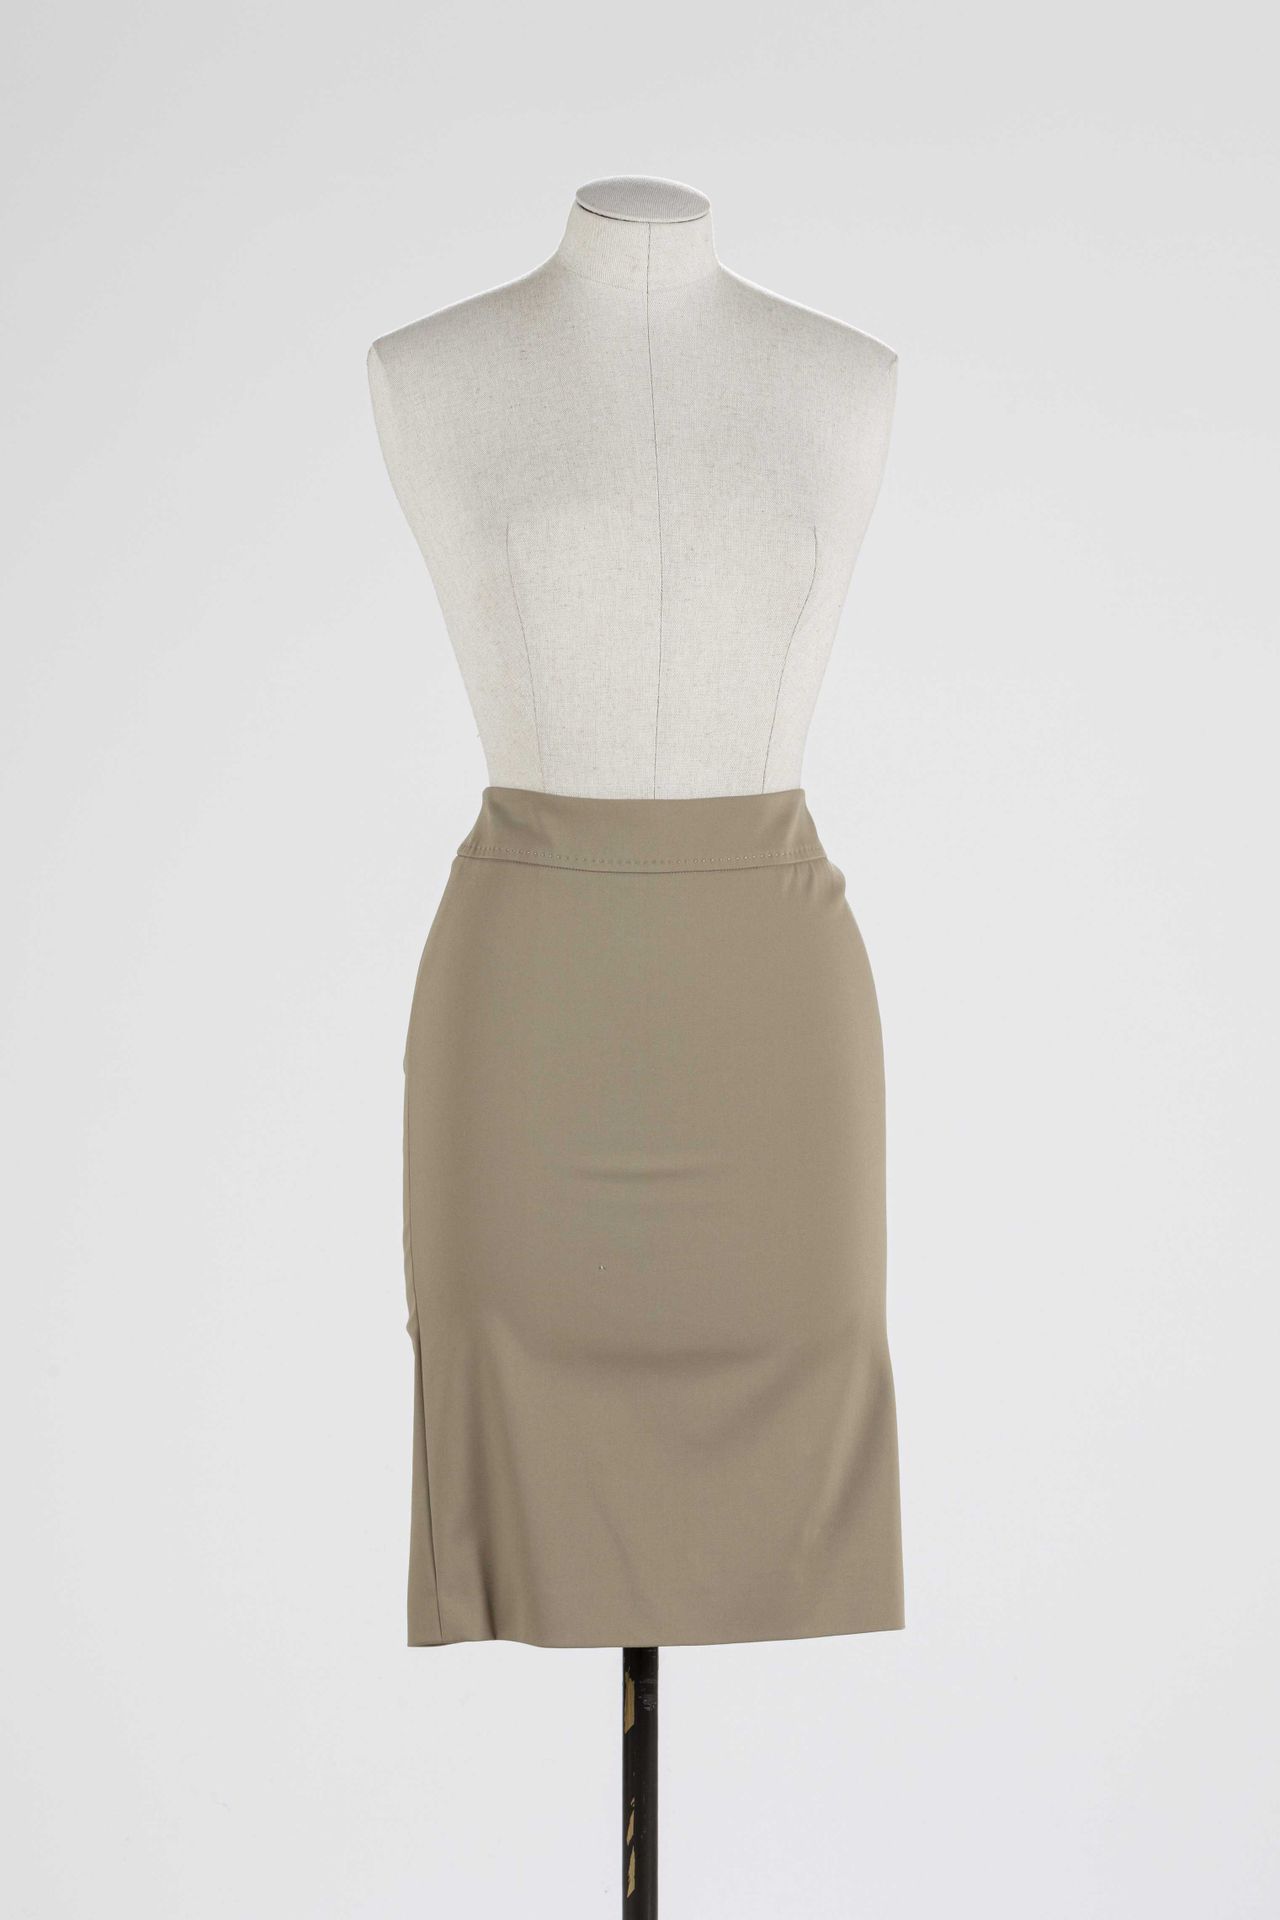 Null ESCADA : straight skirt in beige wool, with a zip fastening in the back, wi&hellip;